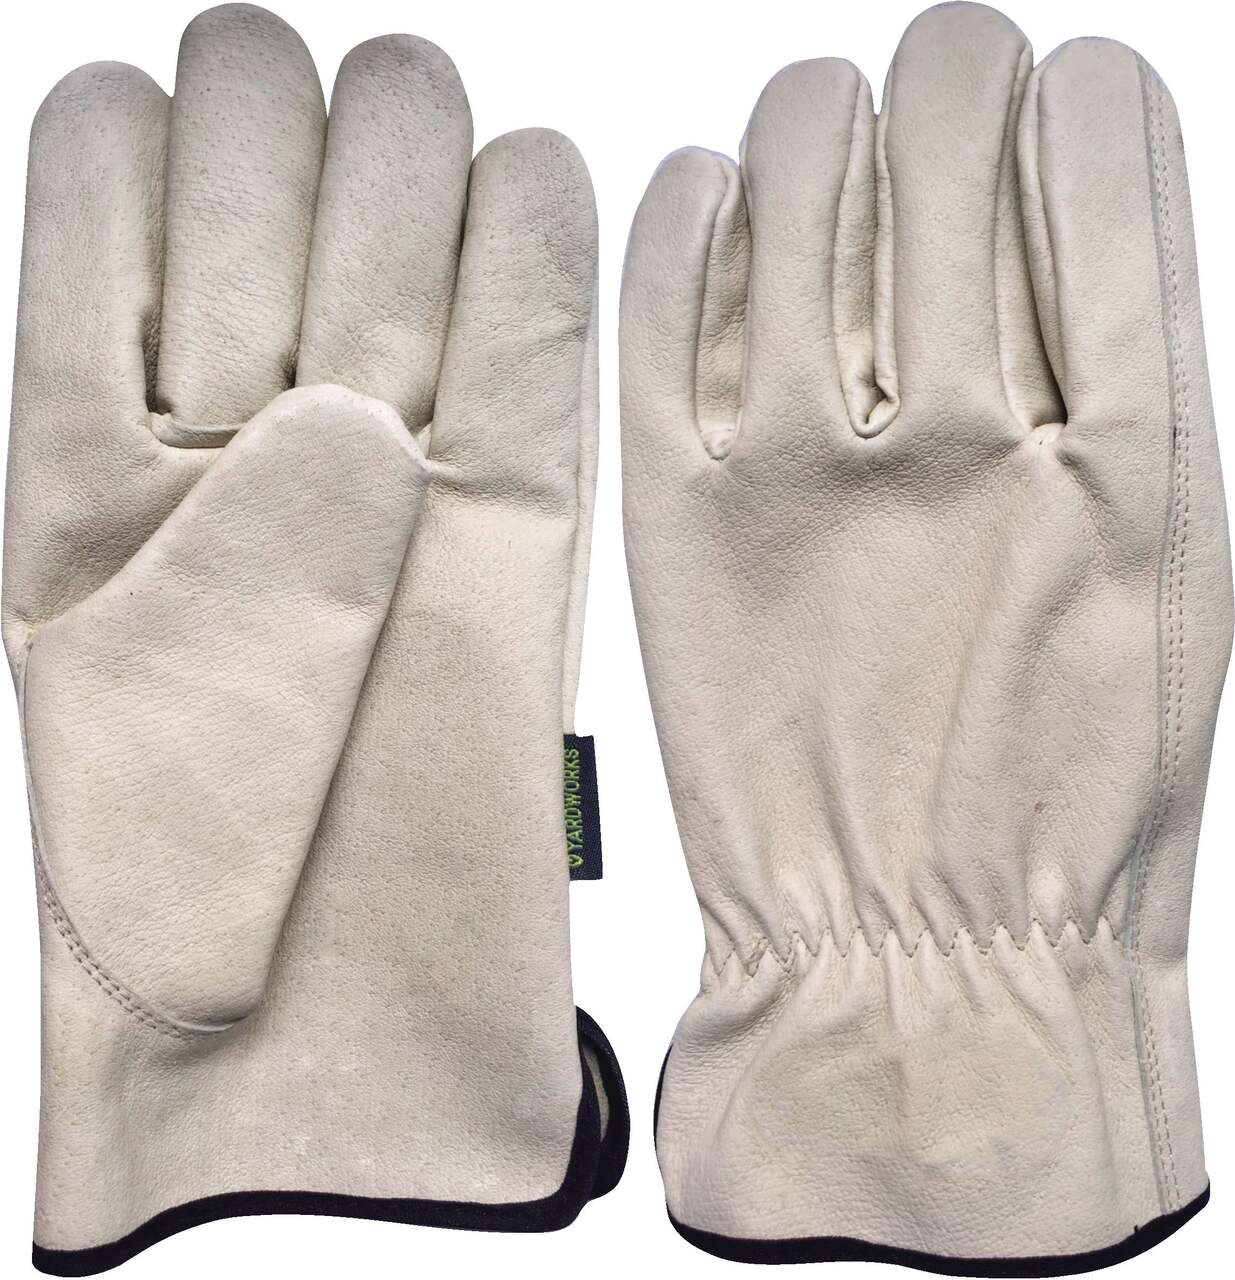 Yardworks Pig Skin Leather Men's Work Gloves, One Size Fits Most, White